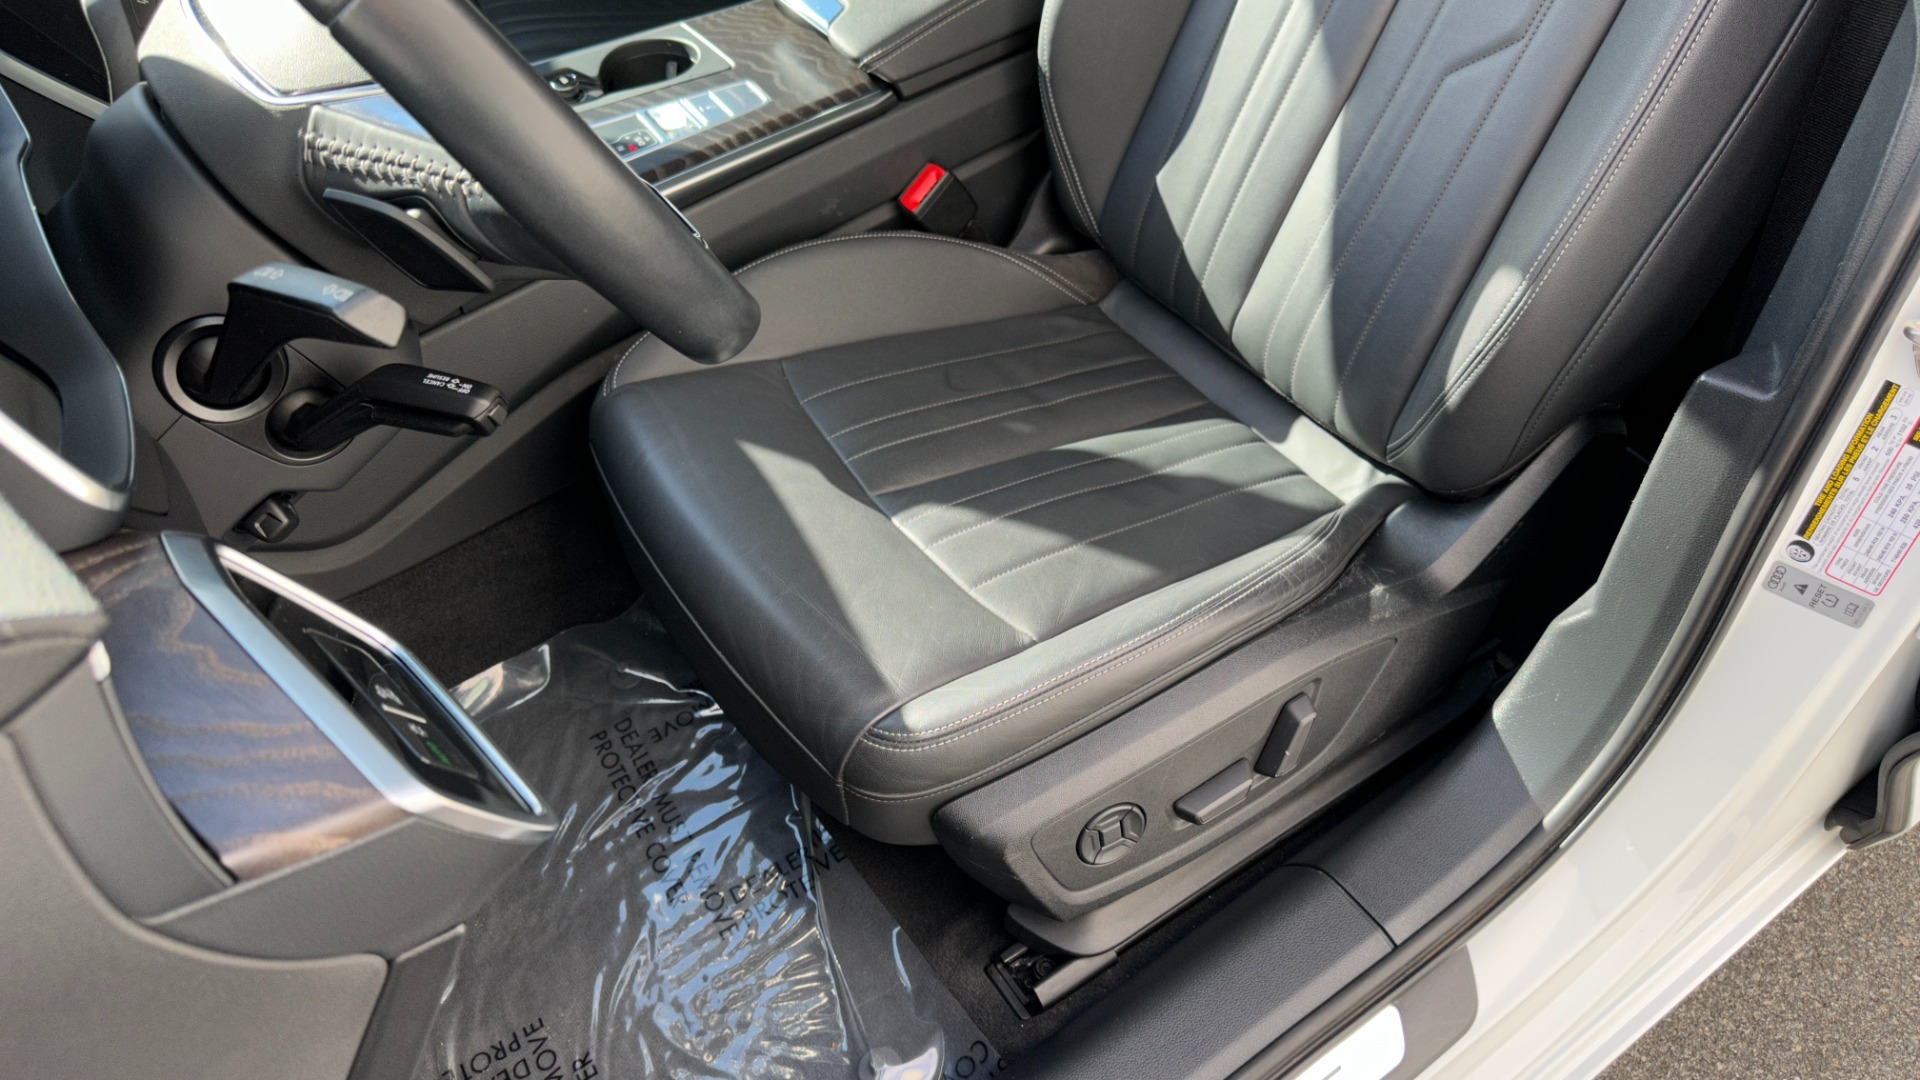 Used 2019 Audi A6 PREMIUM / COLD WEATHER PKG / CONVENIENCE PKG / INTERIOR PROTECTION PKG for sale $36,995 at Formula Imports in Charlotte NC 28227 12